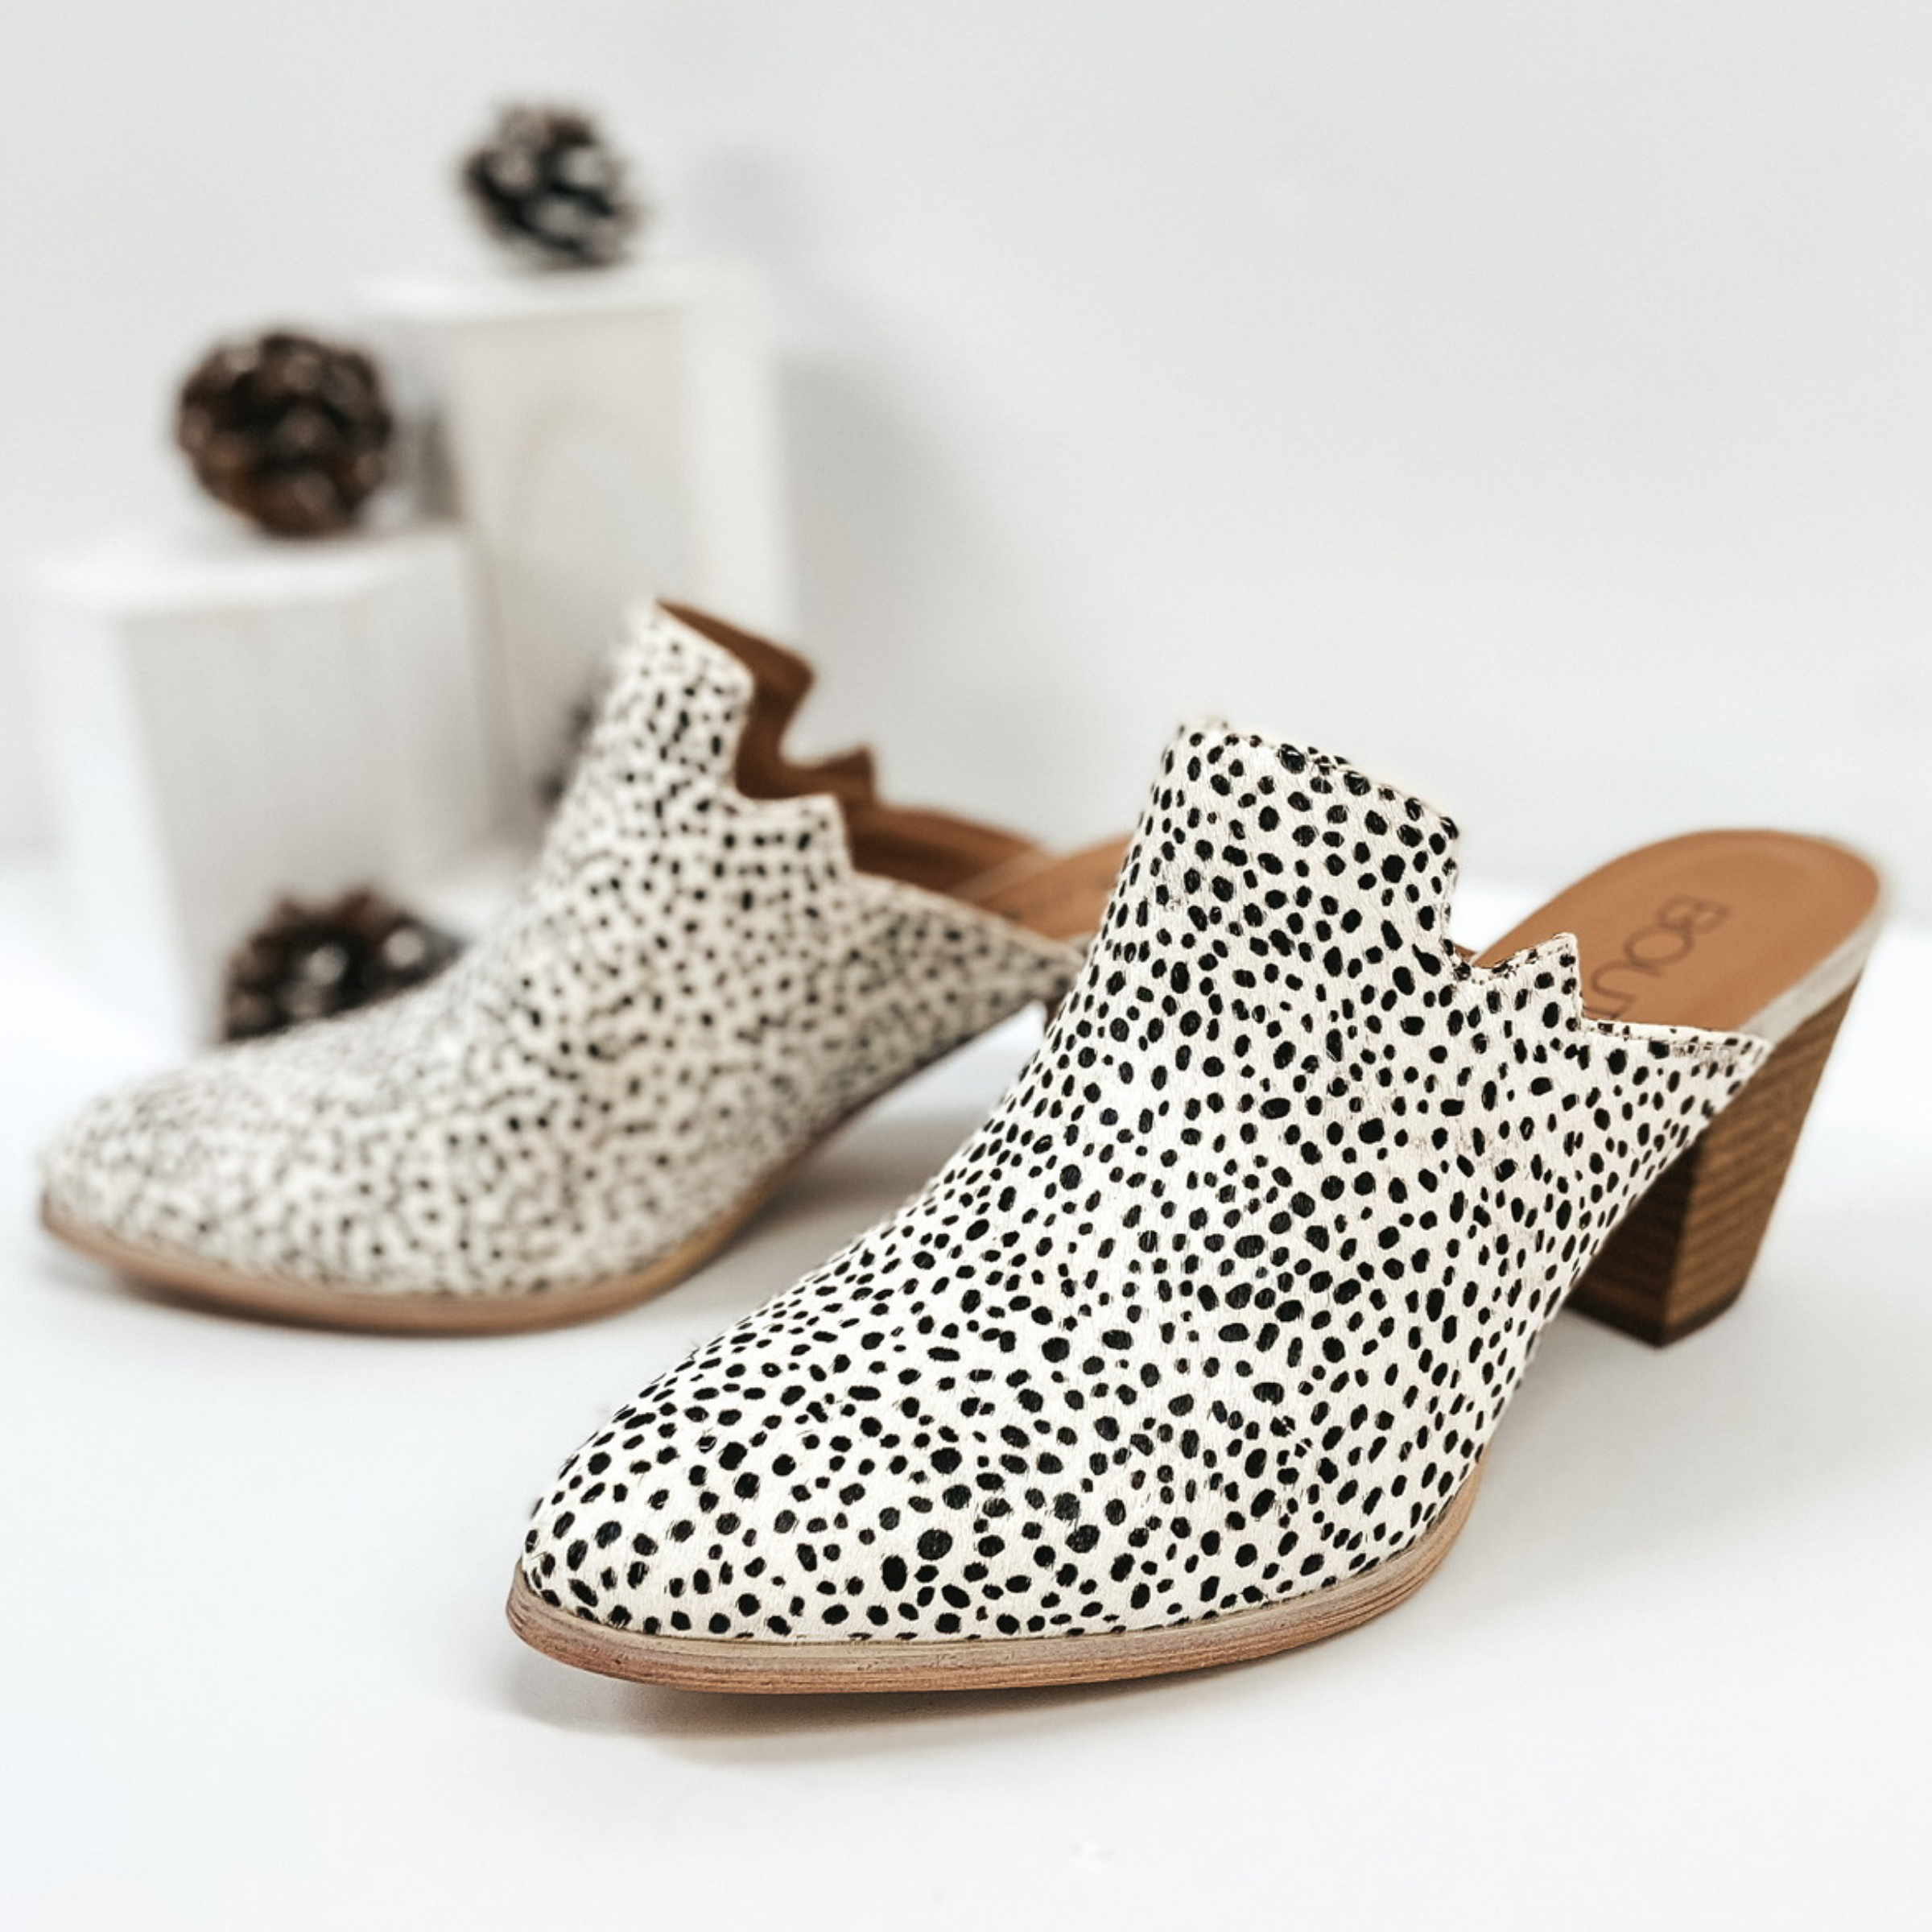 White speckled with black hair on hide heeled mules. Pictured on white background with pinecones.